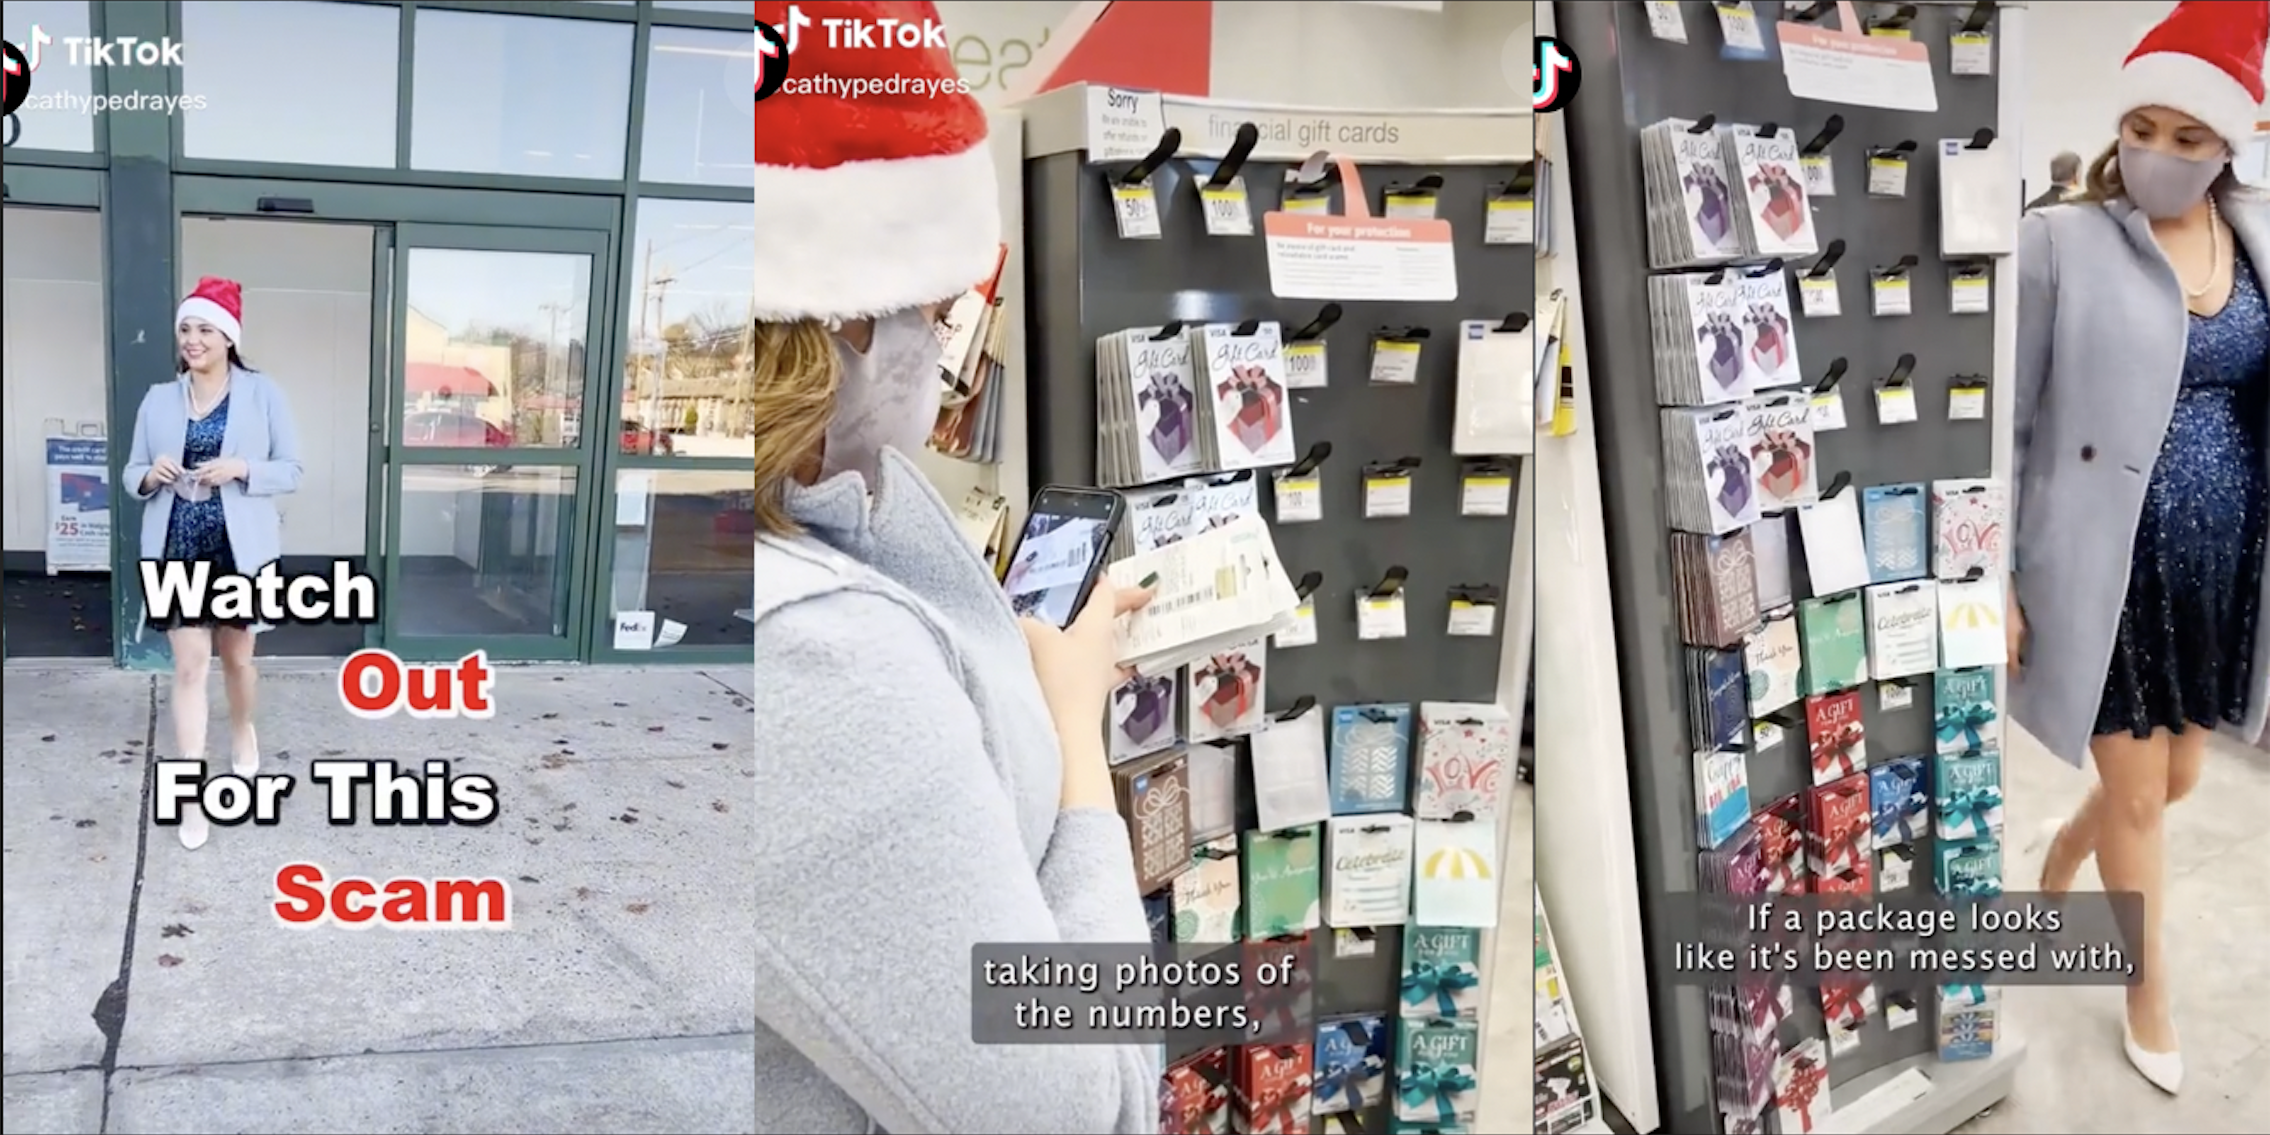 TikTok Cathy Pedrayes talked about gift card scams in a TikTok.